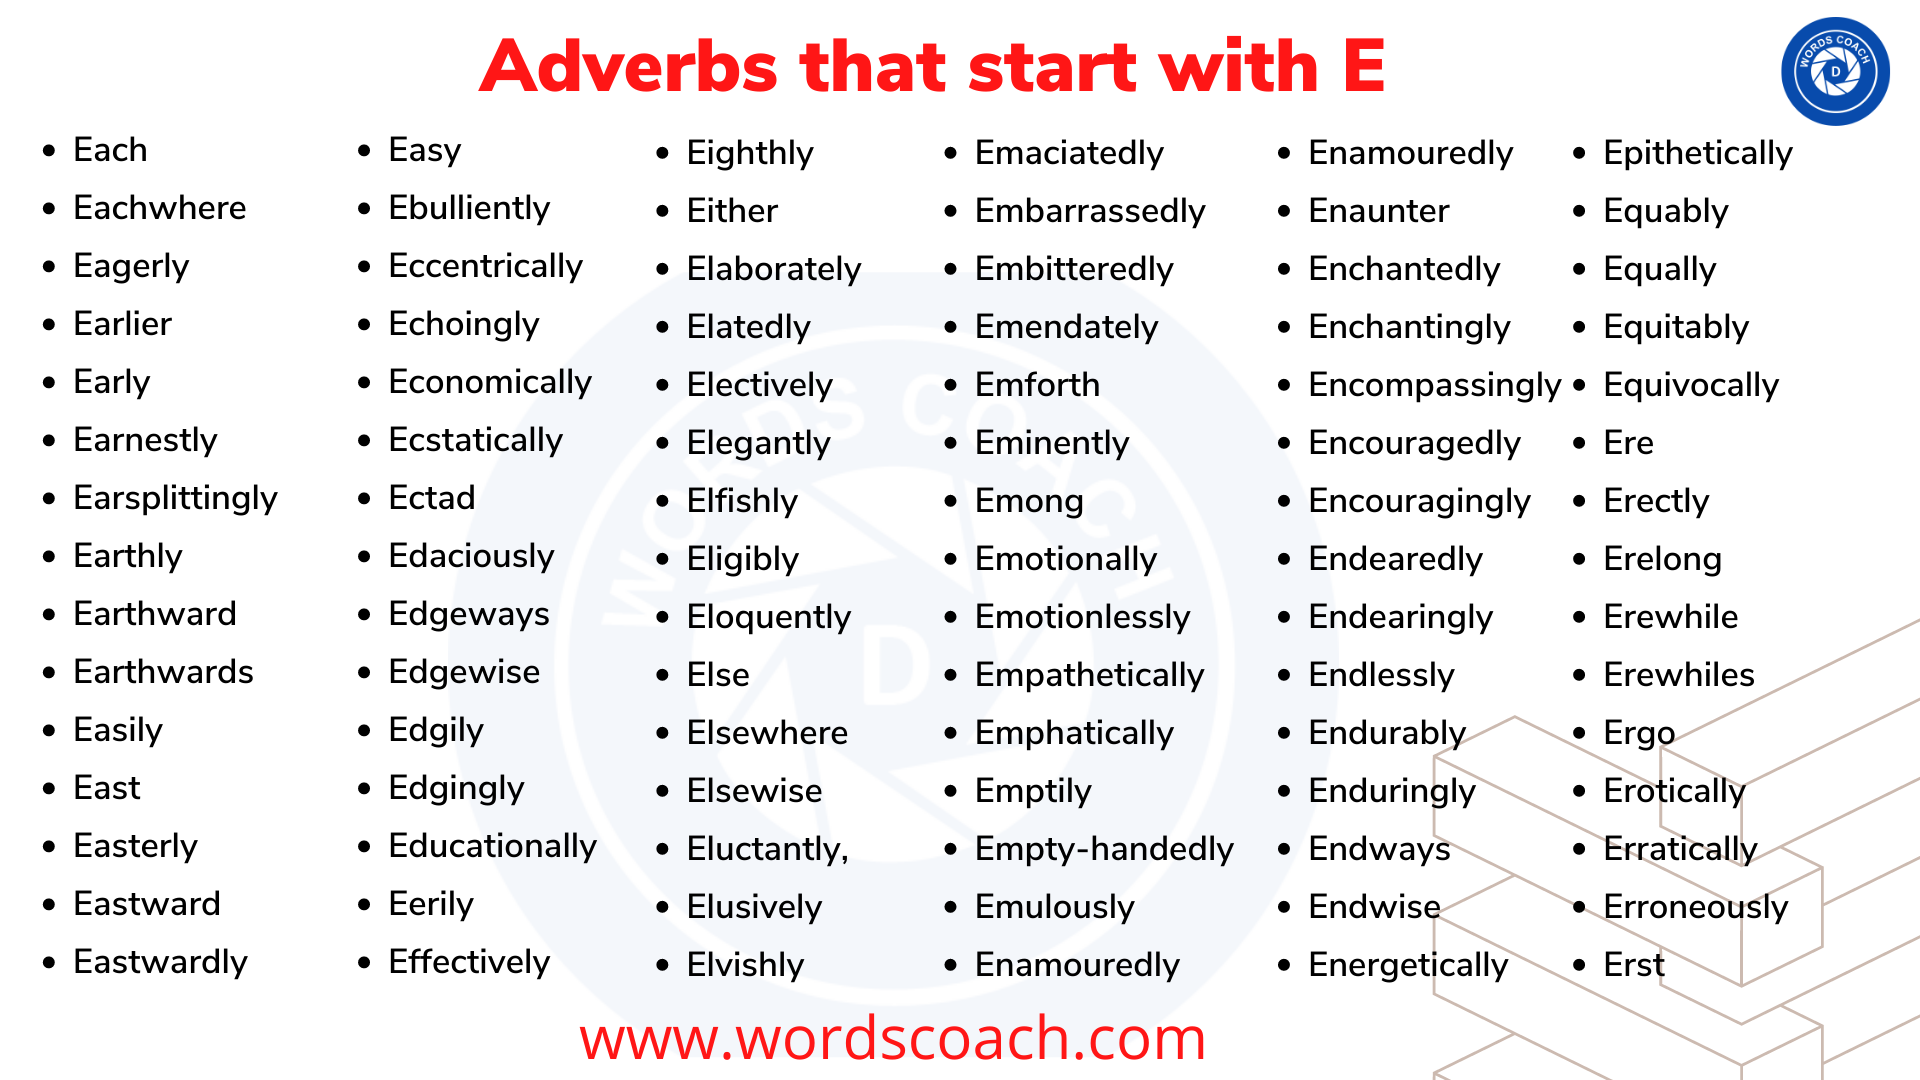 Adverbs that start with E - wordscoach.com